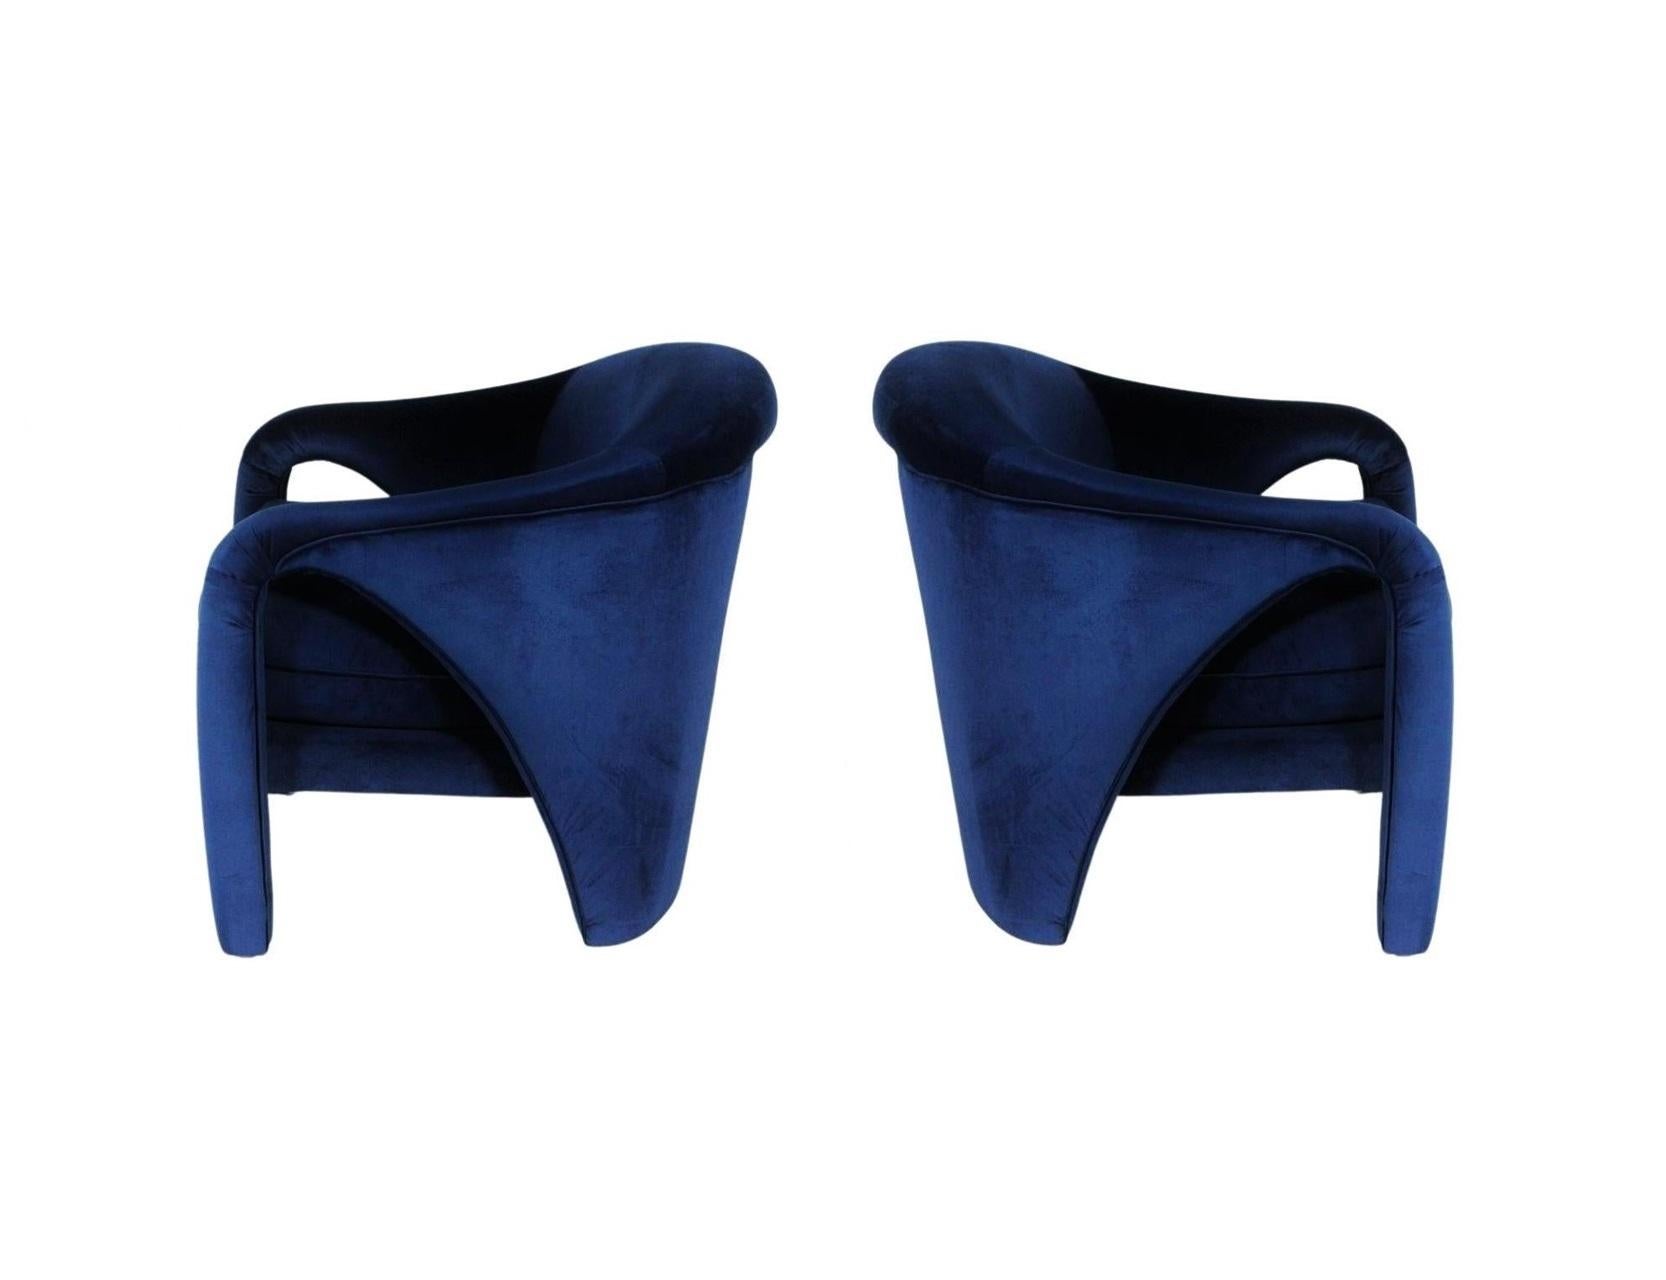 Vladimir Kaganesque Navy Blue Lounge Chairs by Weiman For Sale 6